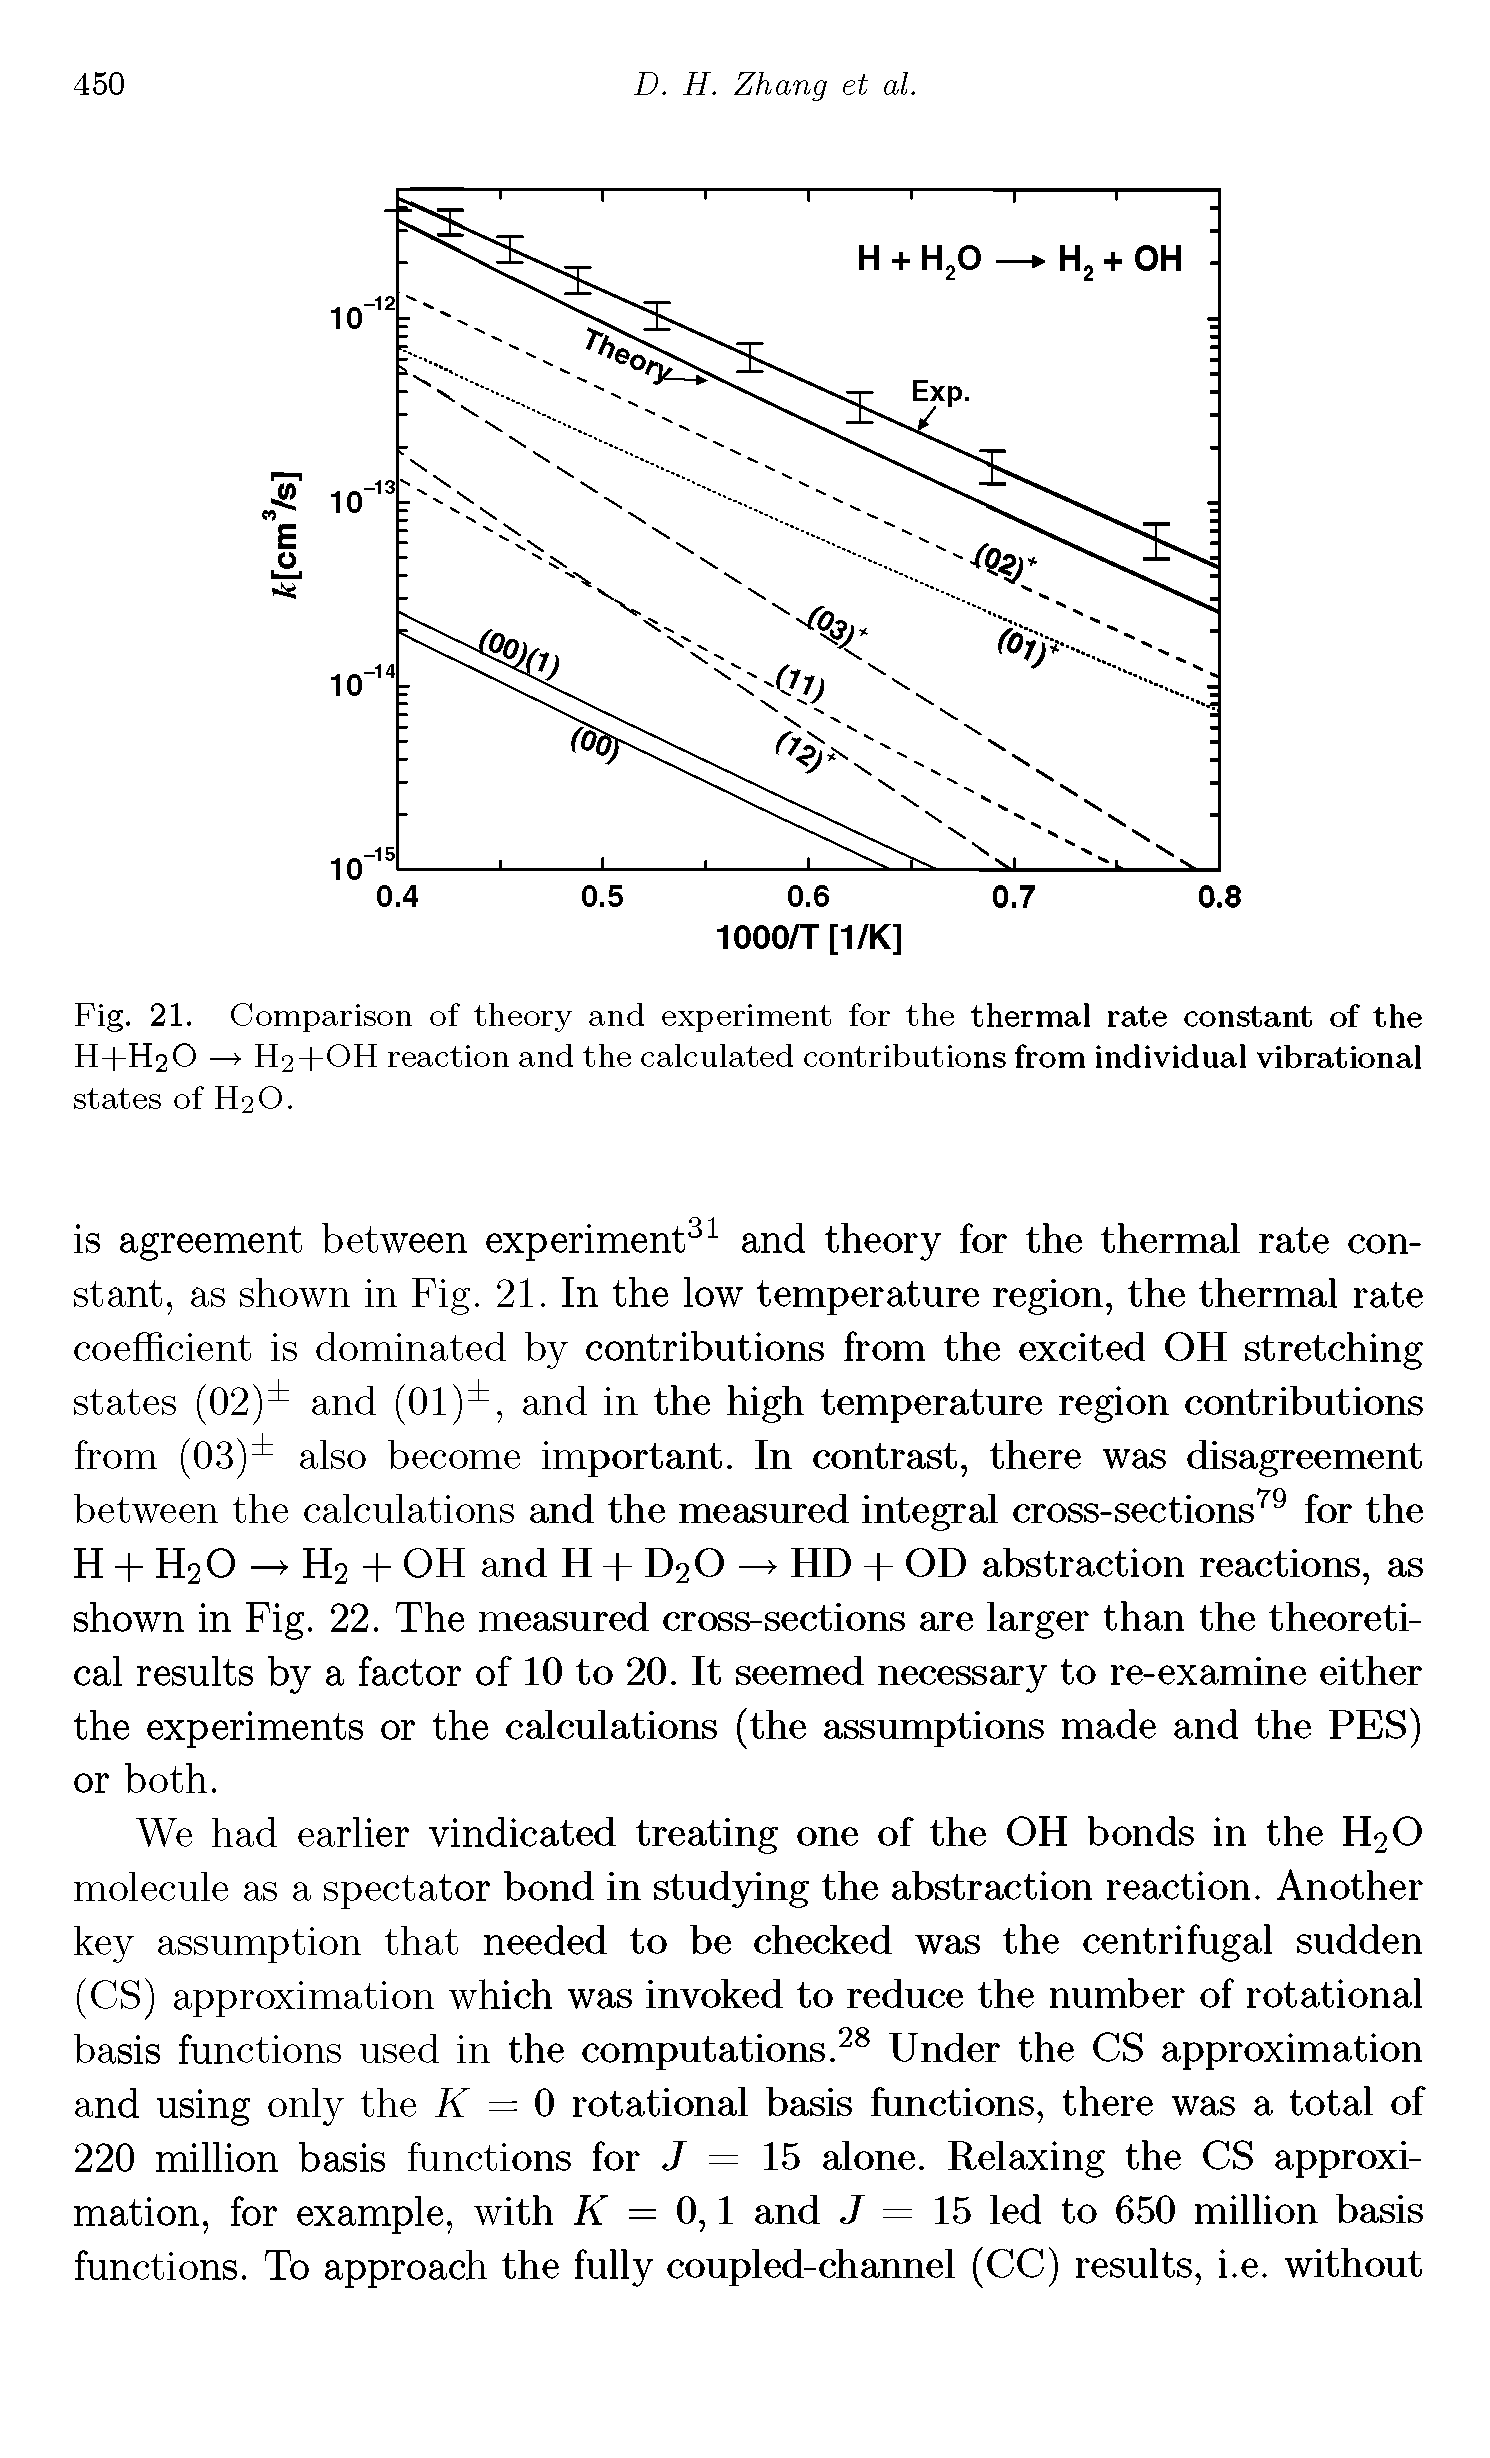 Fig. 21. Comparison of theory and experiment for the thermal rate constant of the H+H2O — H2+OH reaction and the calculated contributions from individual vibrational states of H2O.